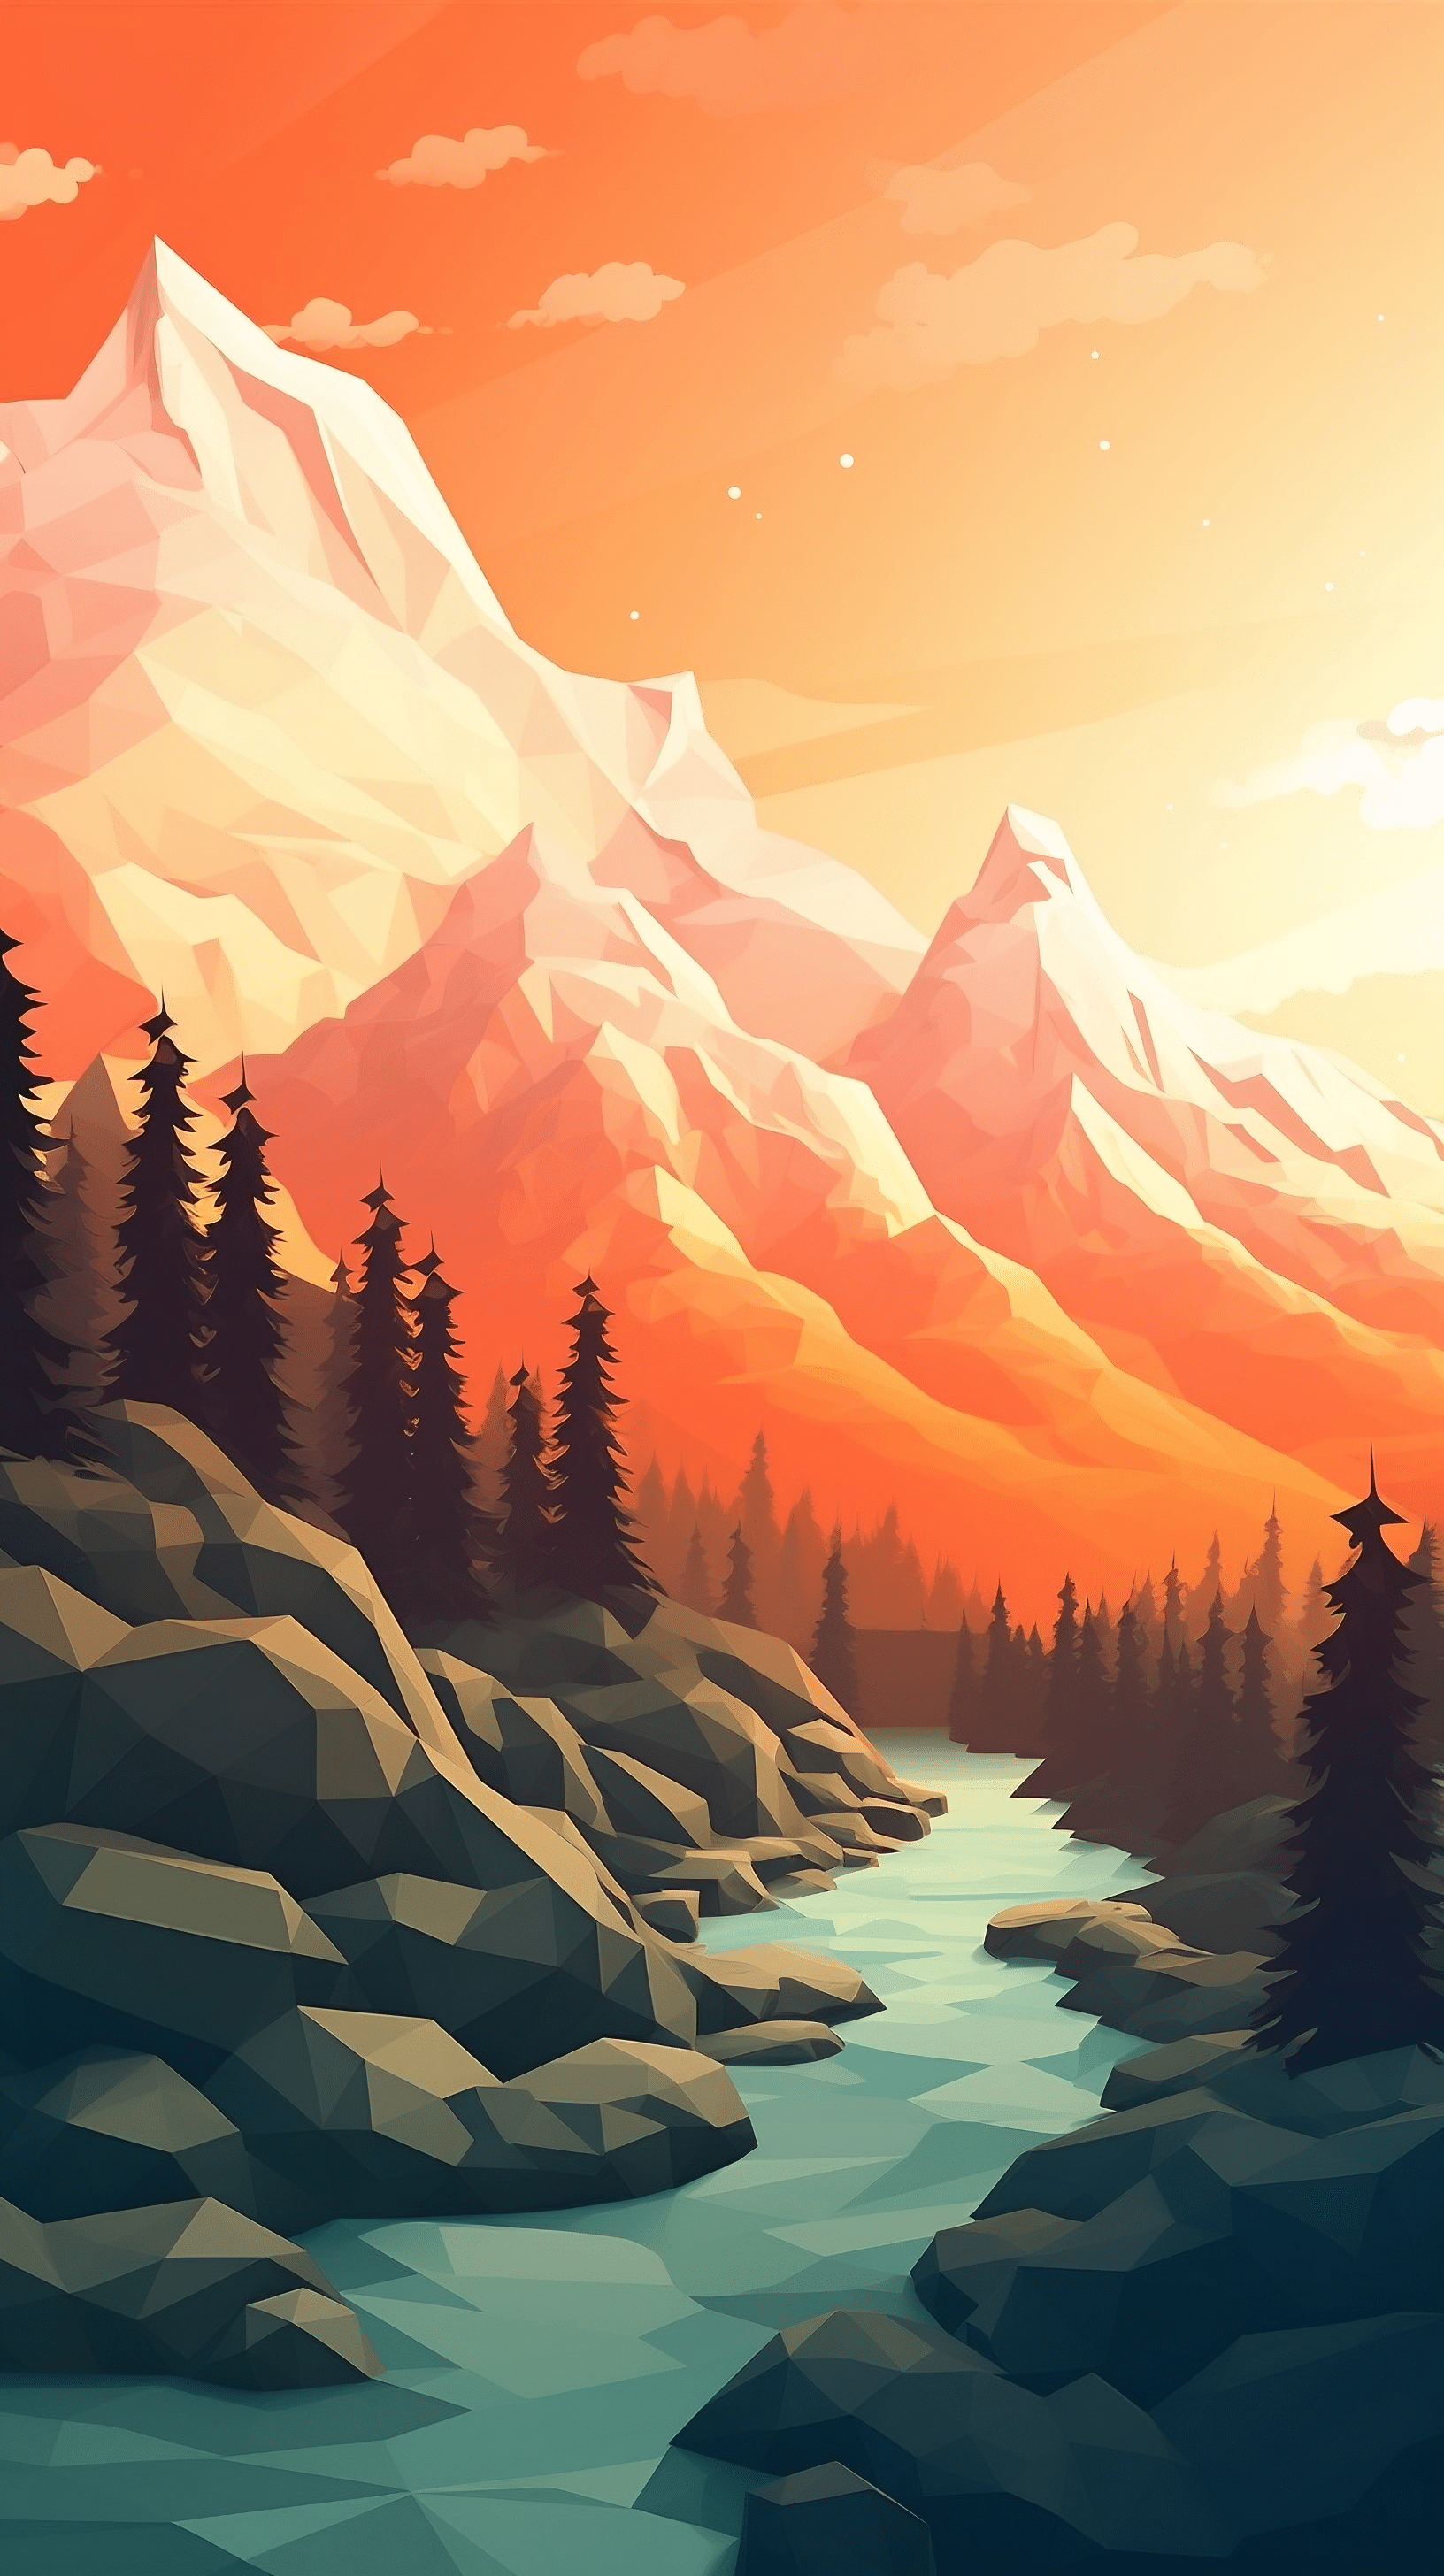 Low poly river